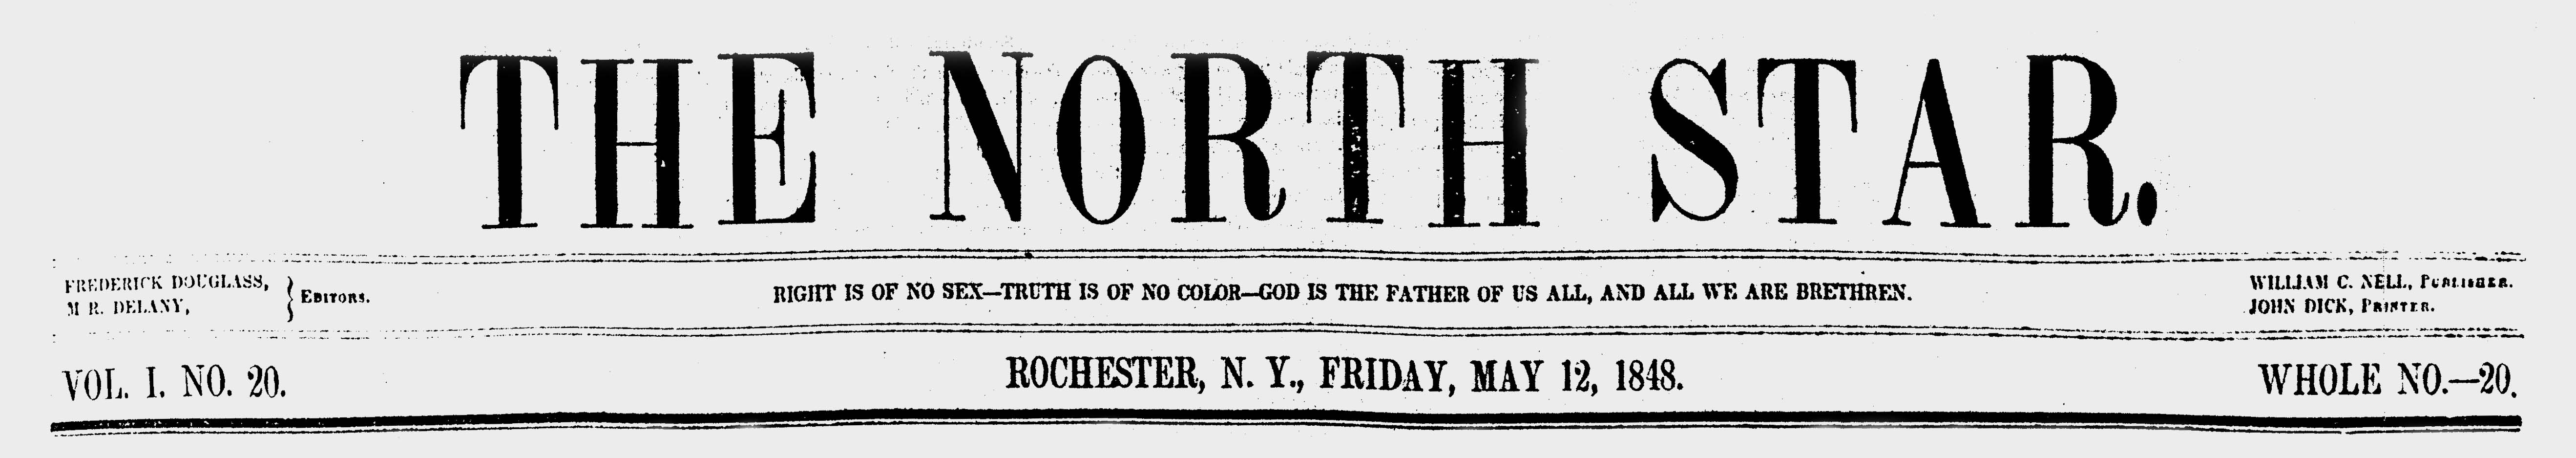 Masthead of The North Star, dated May 12, 1848.